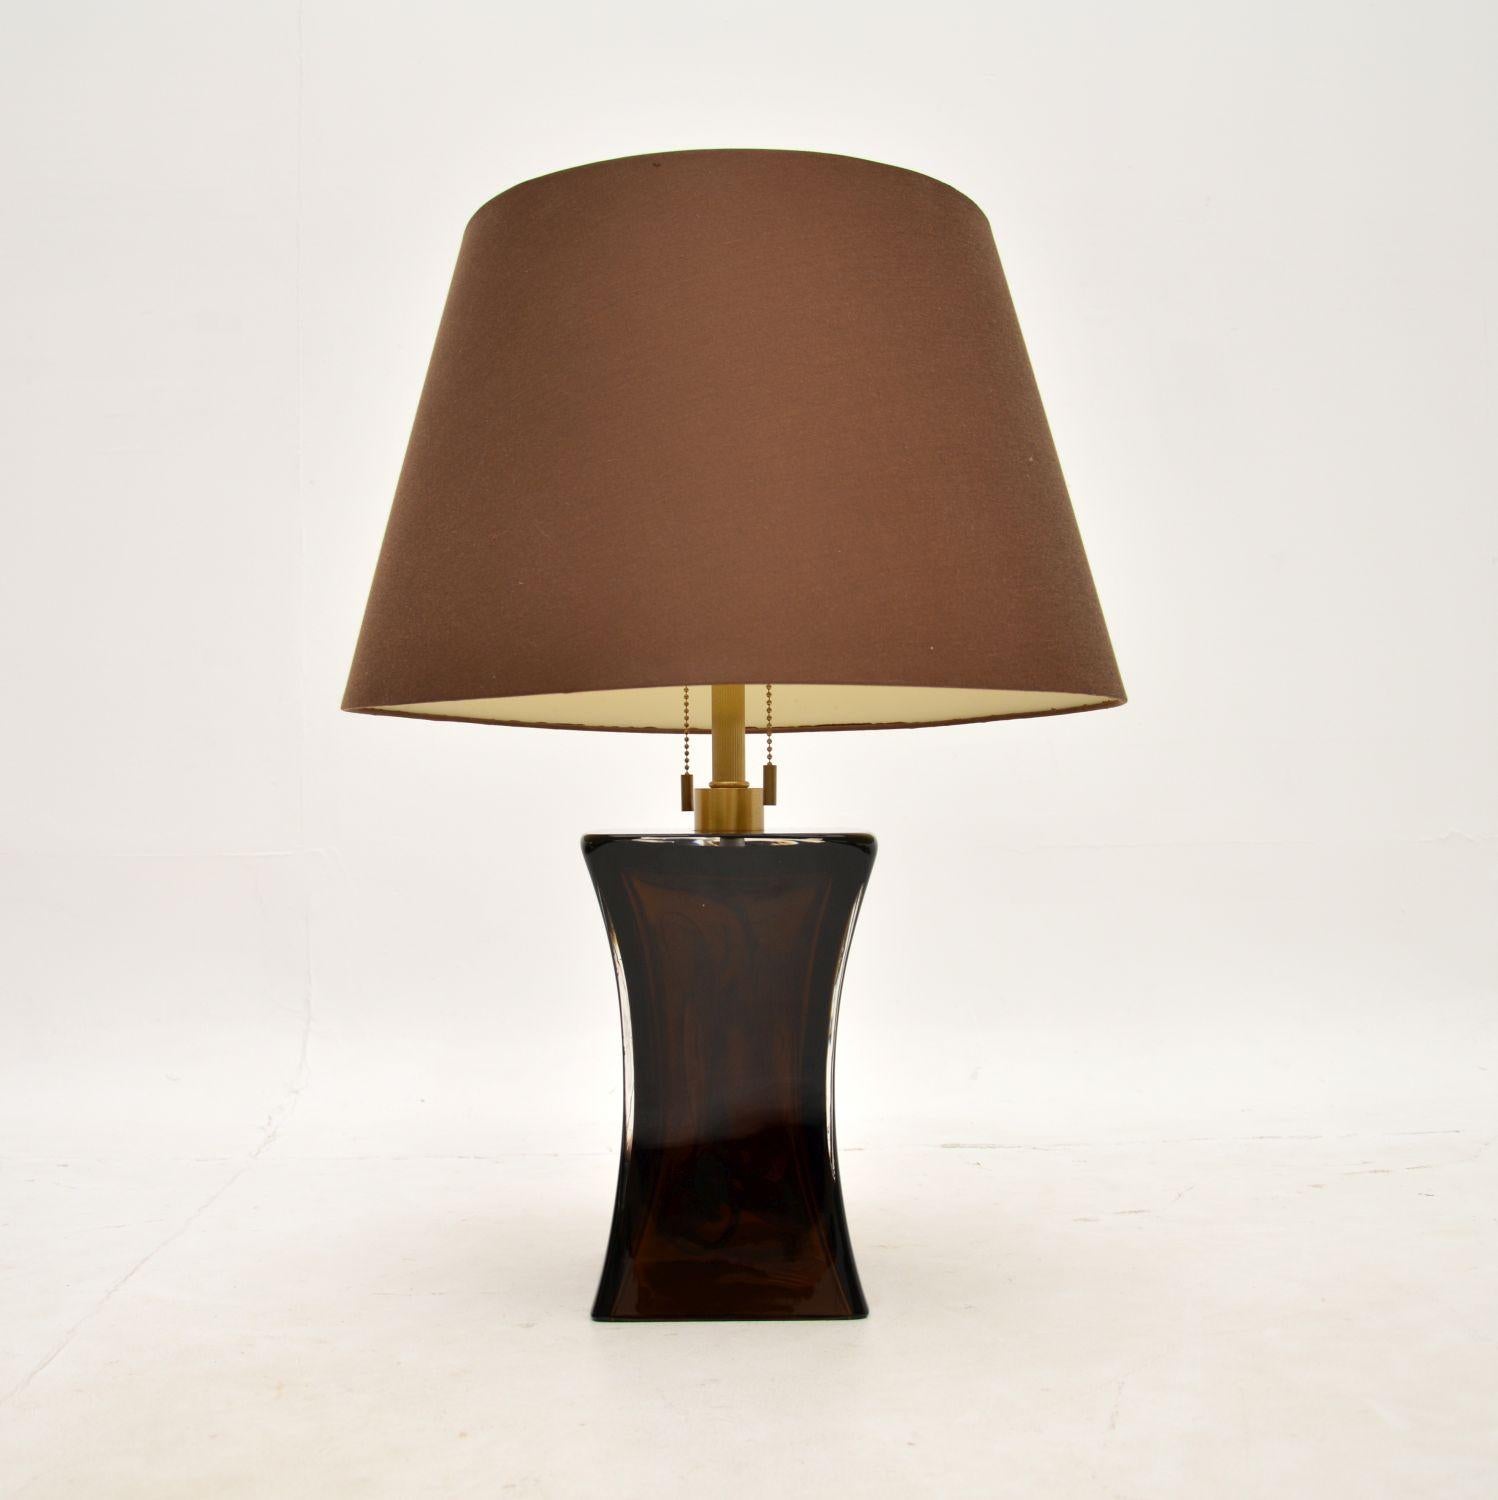 A stunning and extremely well made Italian Murano glass Torre table lamp by Donghia. This was made in Italy and it dates from the early 21st century.

The quality is exceptional, the brown glass base is very thick and heavy, it is beautifully